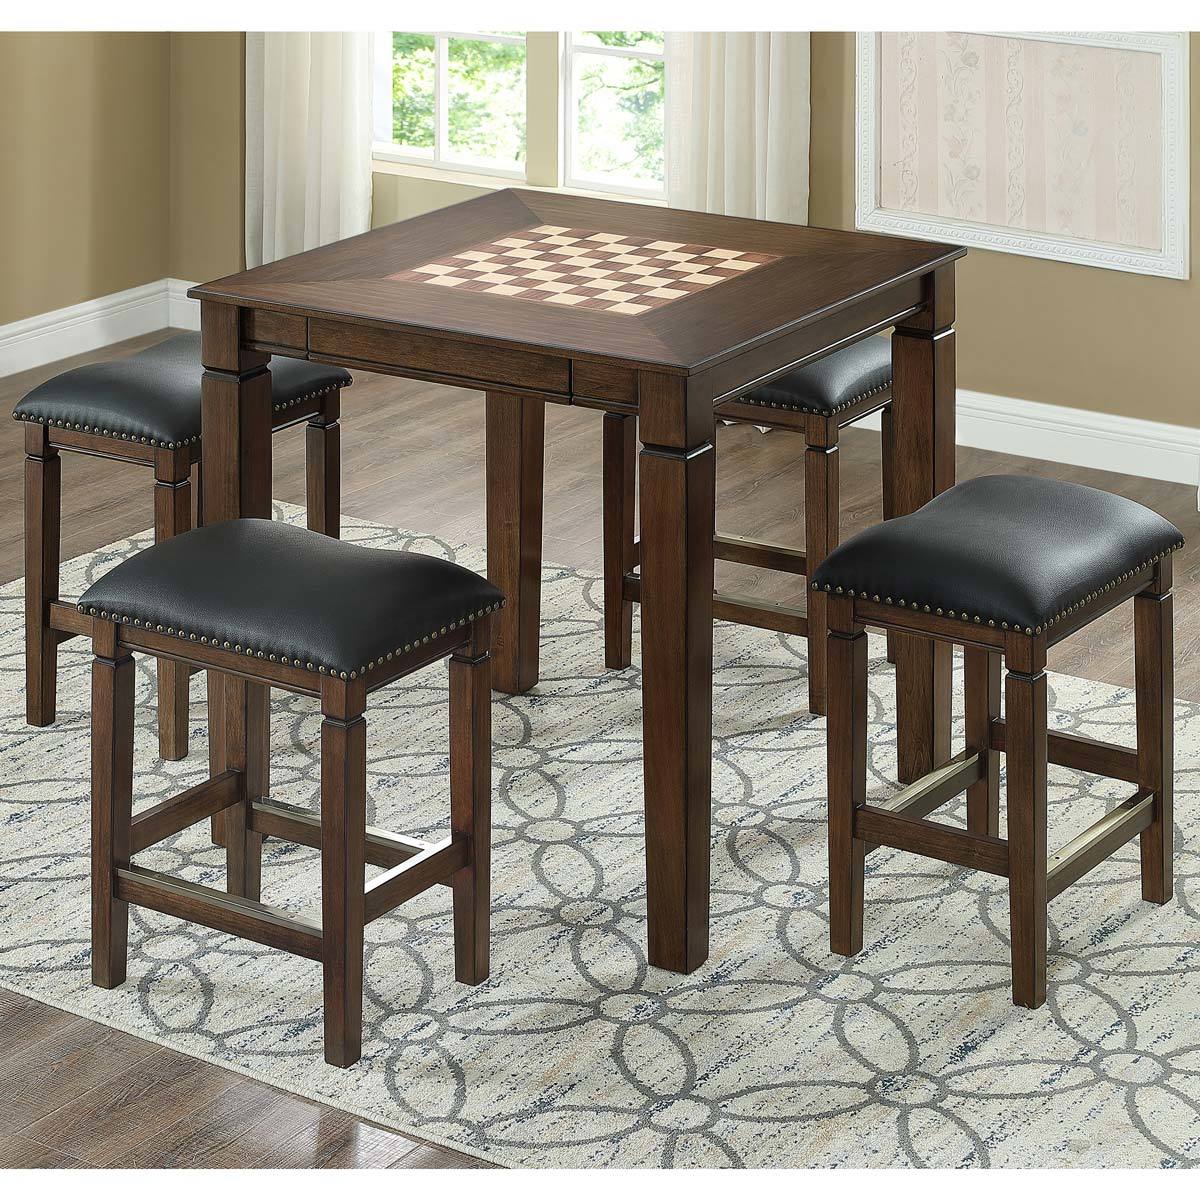 Well Universal Game Top Table With 4 Stools Game Accessories